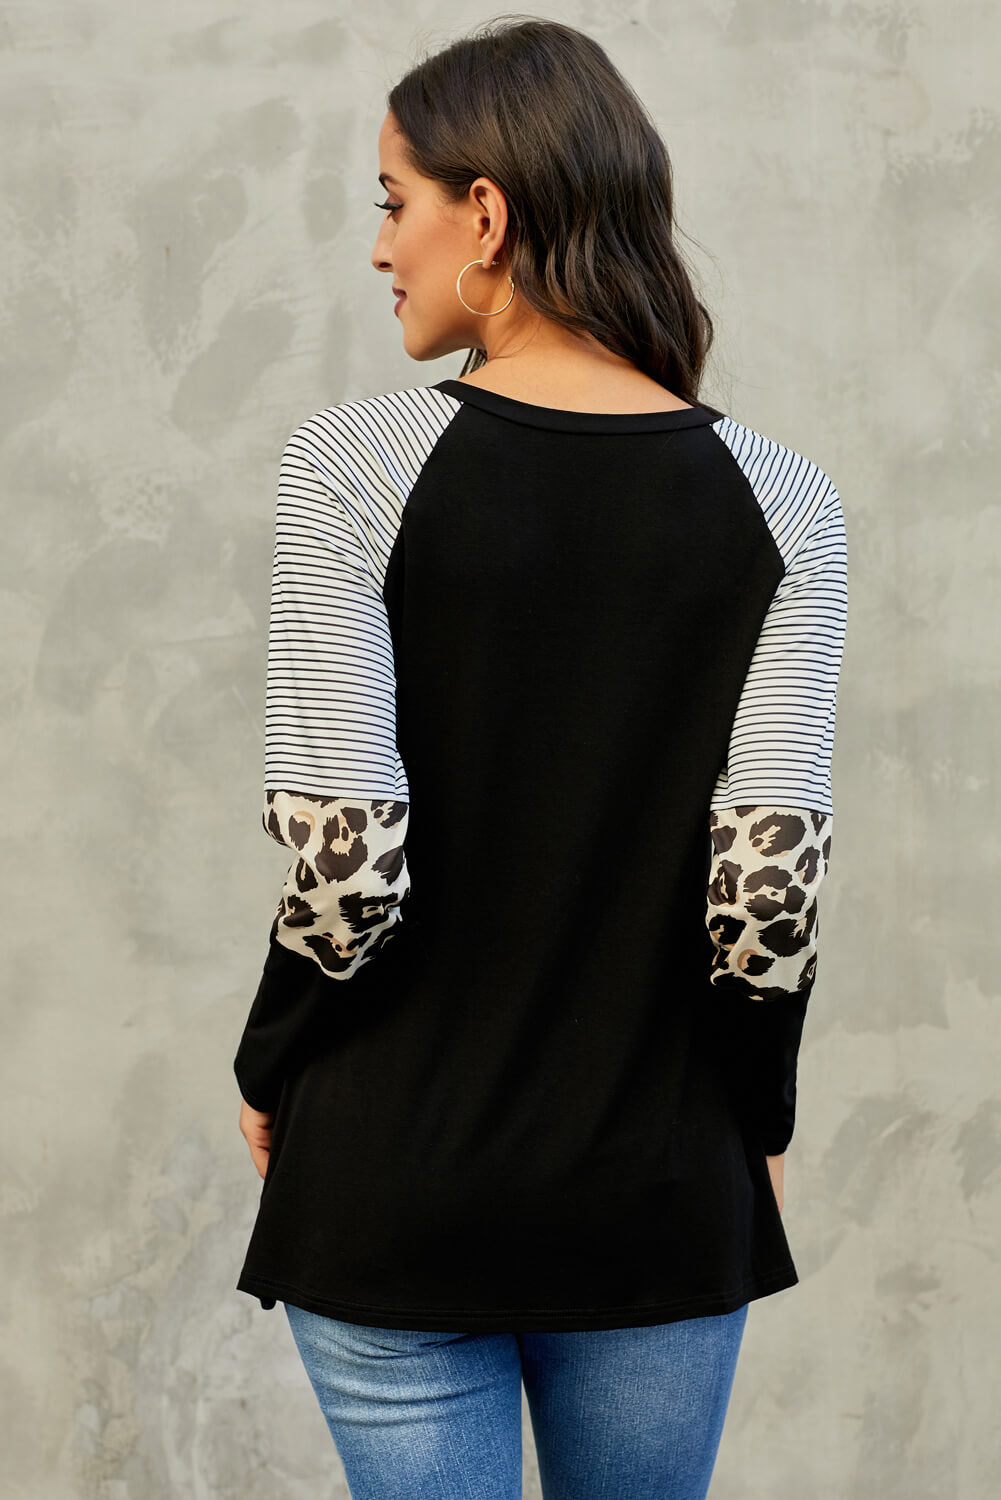 Black Striped and Leopard Color Block Long Sleeves Top